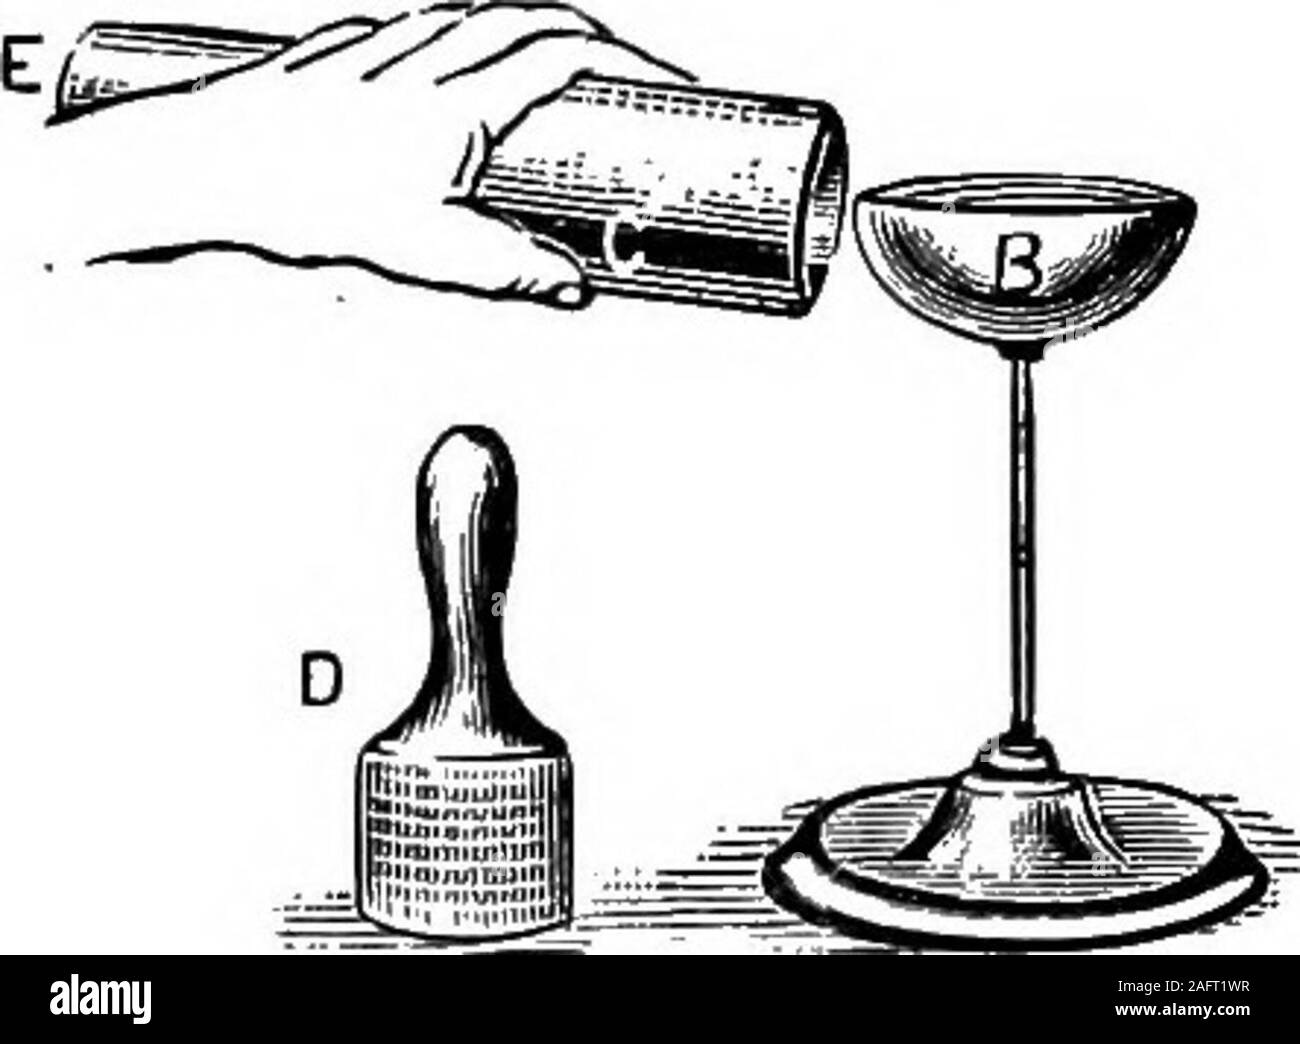 The principles of physics. (always an even number), vibrating parts.  Experiment 6.—Remove the brass plate (Fig. 191) from its support, and  fasten the bell B (Fig. 194) on the support. Bow